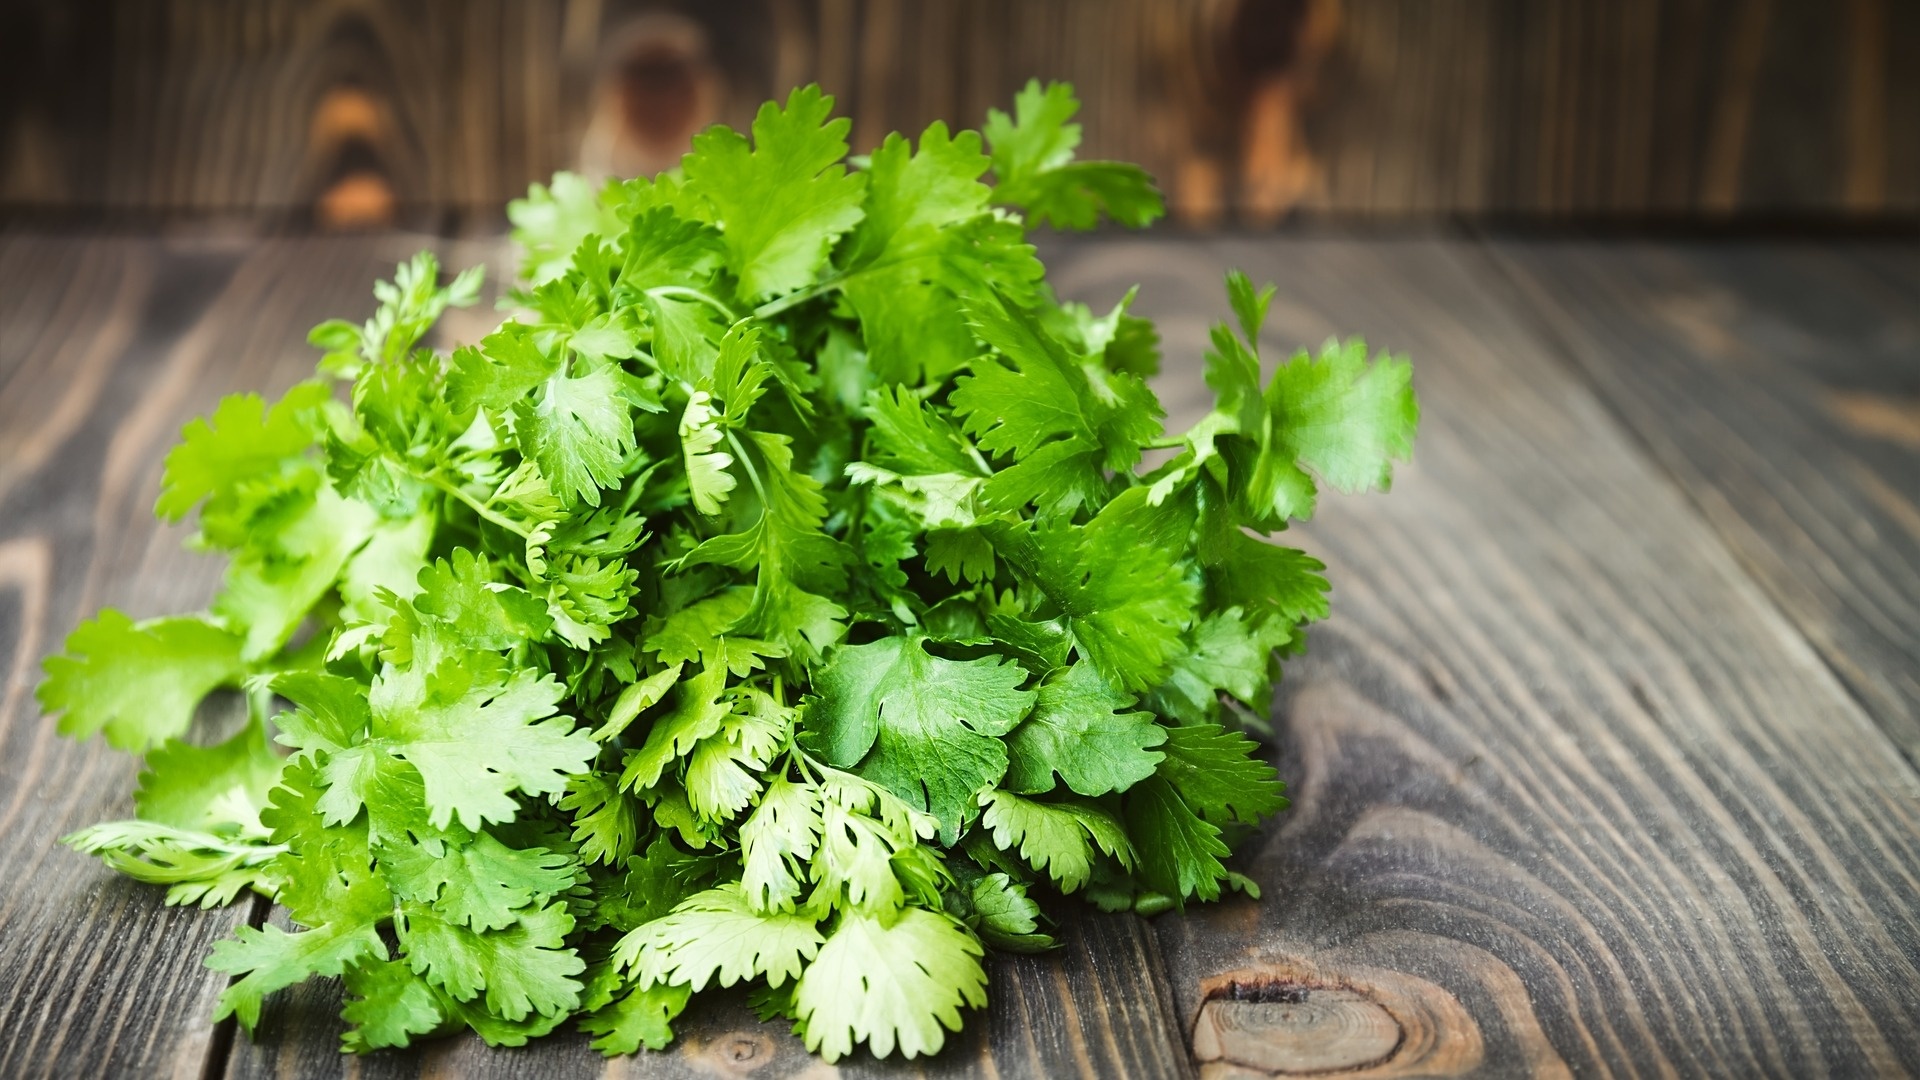 Parsley herb, Archaeology of herbs and spices, Cilantro and Chinese parsley, Aromatic flavors, 1920x1080 Full HD Desktop